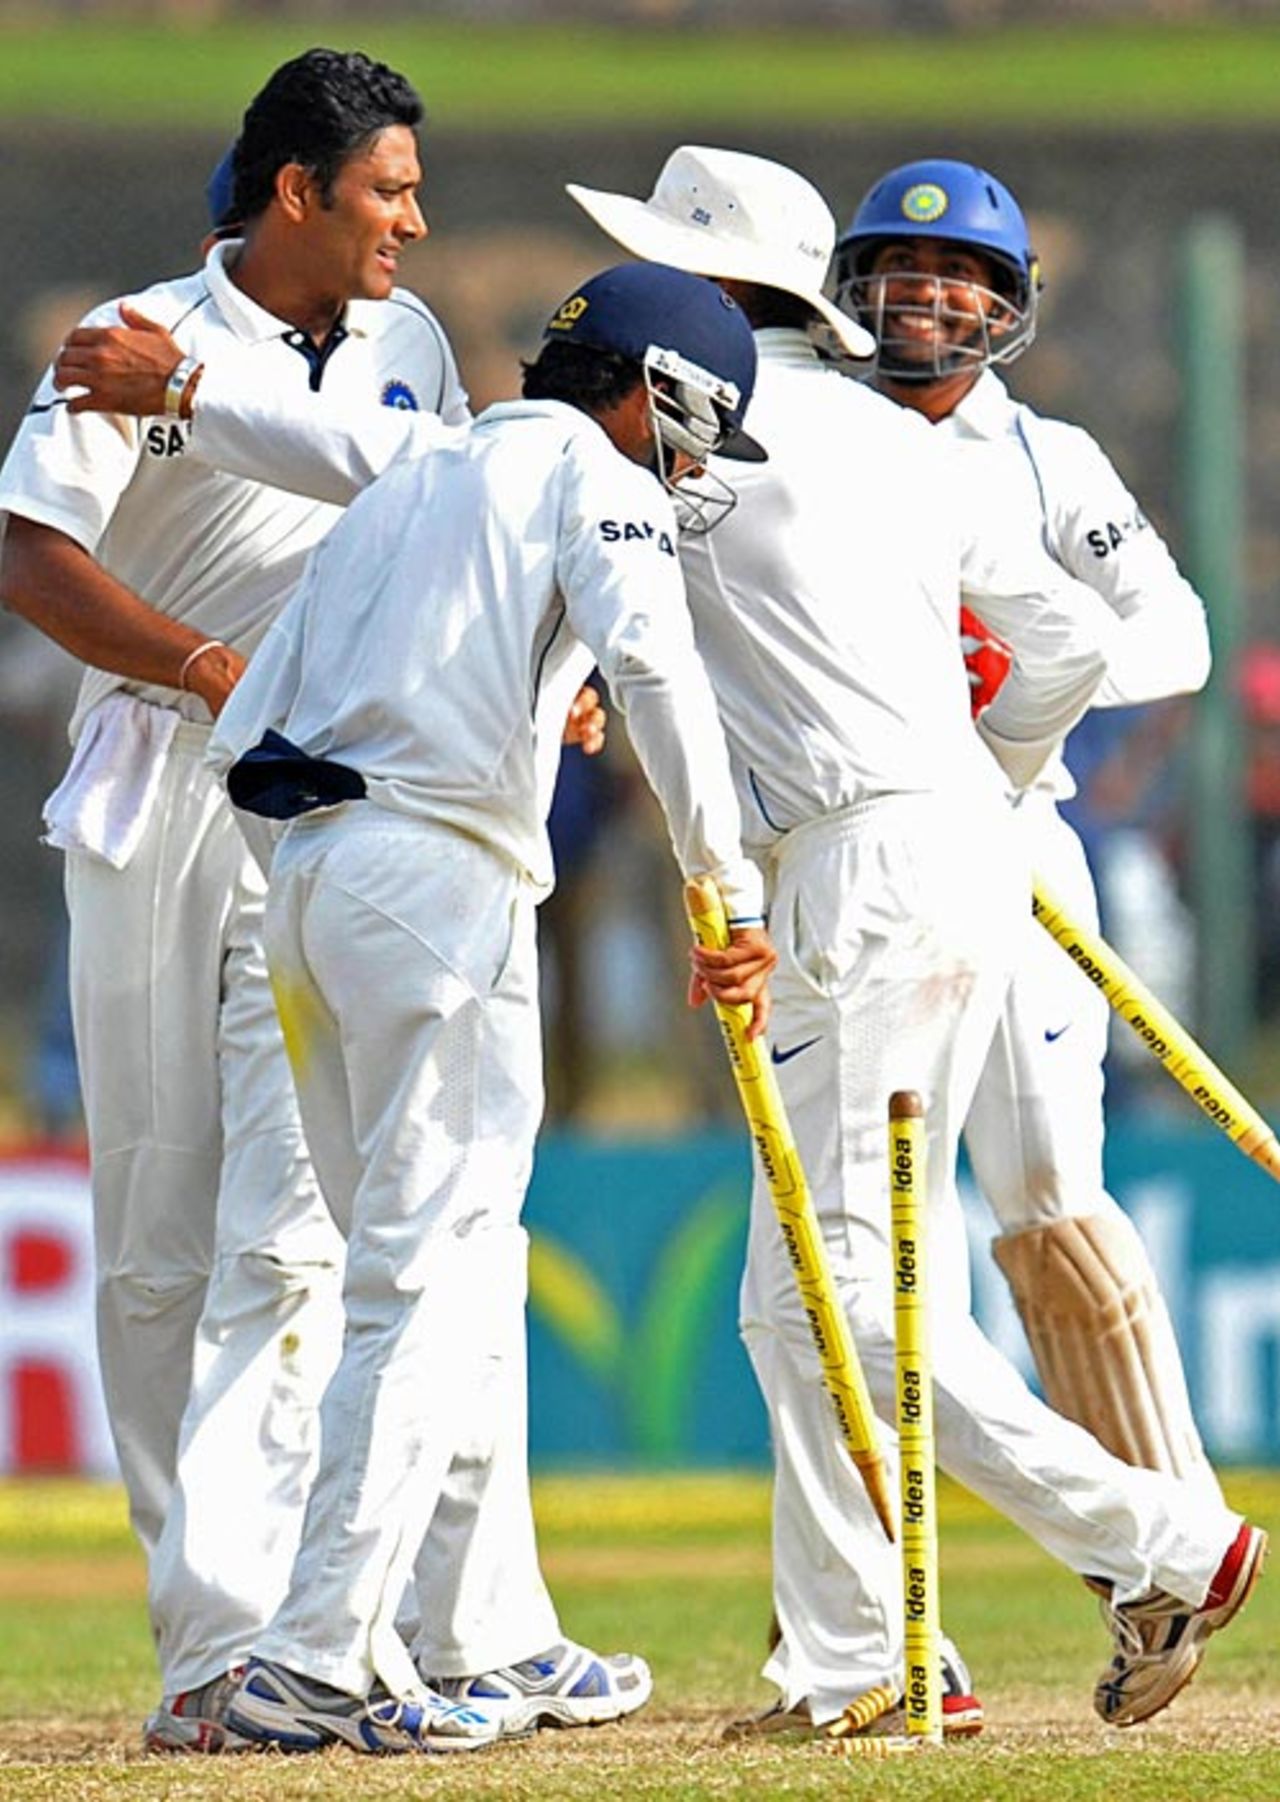 Anil Kumble is congratulated by his team-mates, Sri Lanka v India, 2nd Test, Galle, 4th day, August 3, 2008